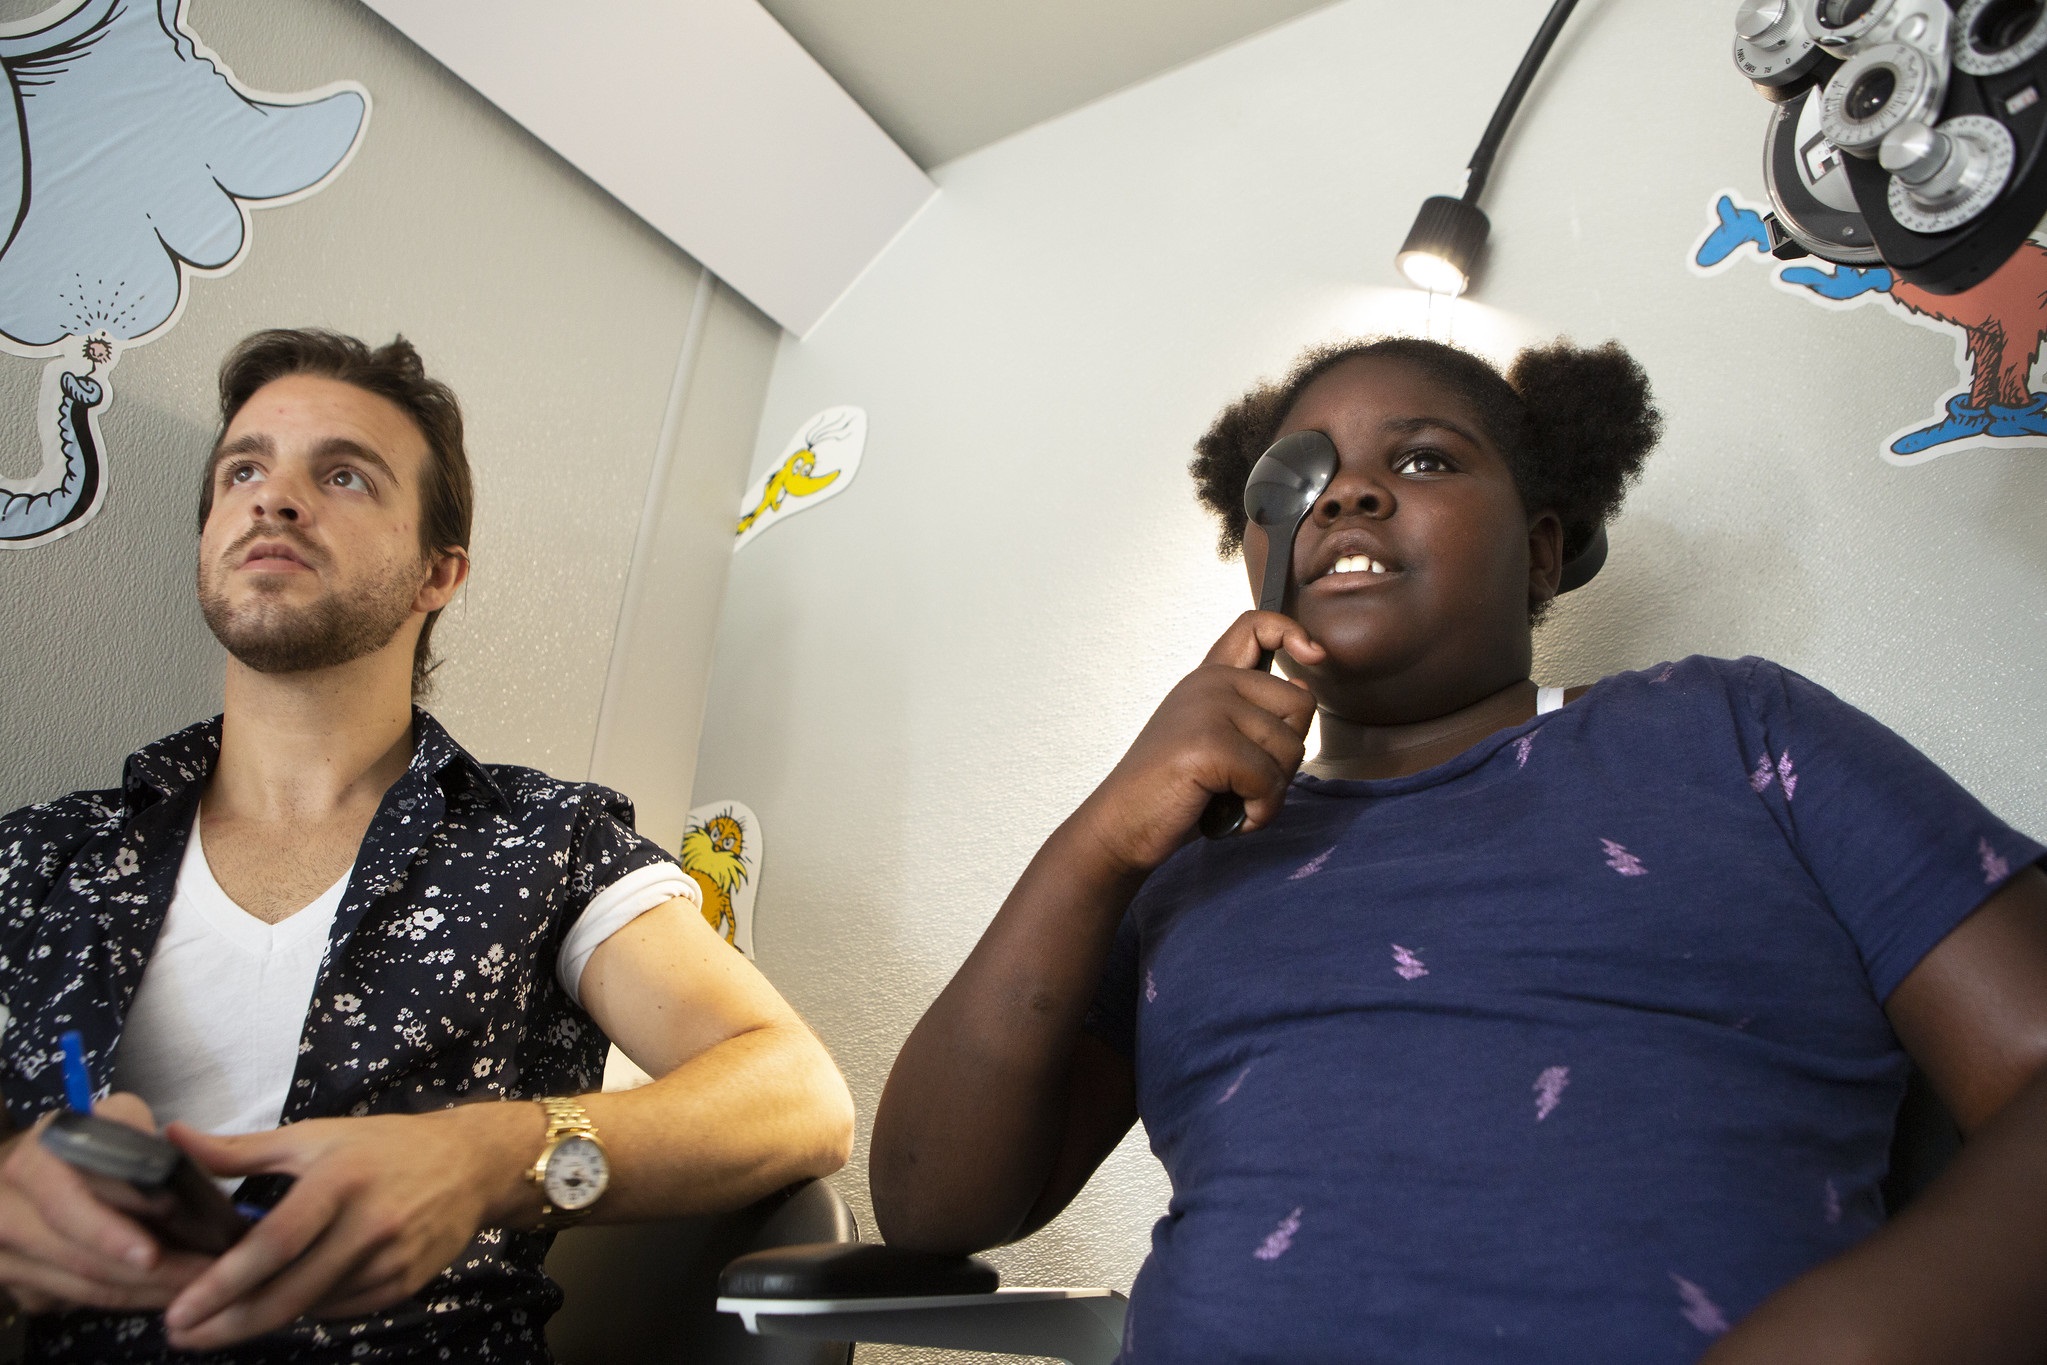 Dr. Aaron Harsch, an optometrist with Vision to Learn’s mobile eye clinic, sits next to 89-year-old Paris Gentry as she holds an eye occluder to her eye. She has curly hair and is wearing a short-sleeved top. Behind them Dr. Seuss characters are on the wall. Eye testing equipment is to the upper-right.